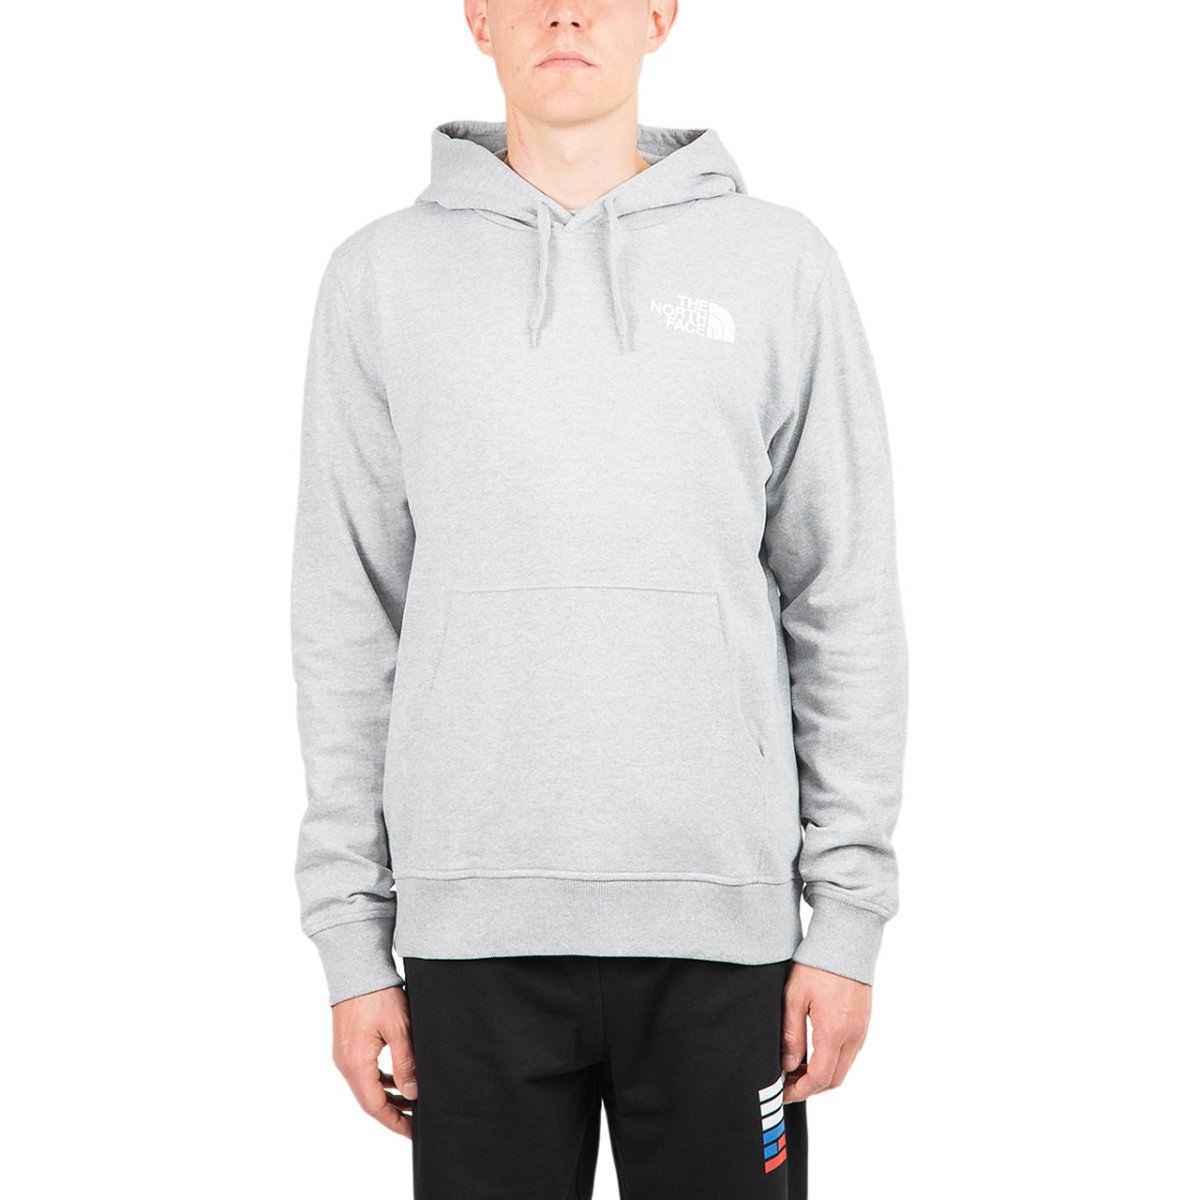 The North Face International Collection Classic Climb Hoodie (Hellgrau)  - Allike Store